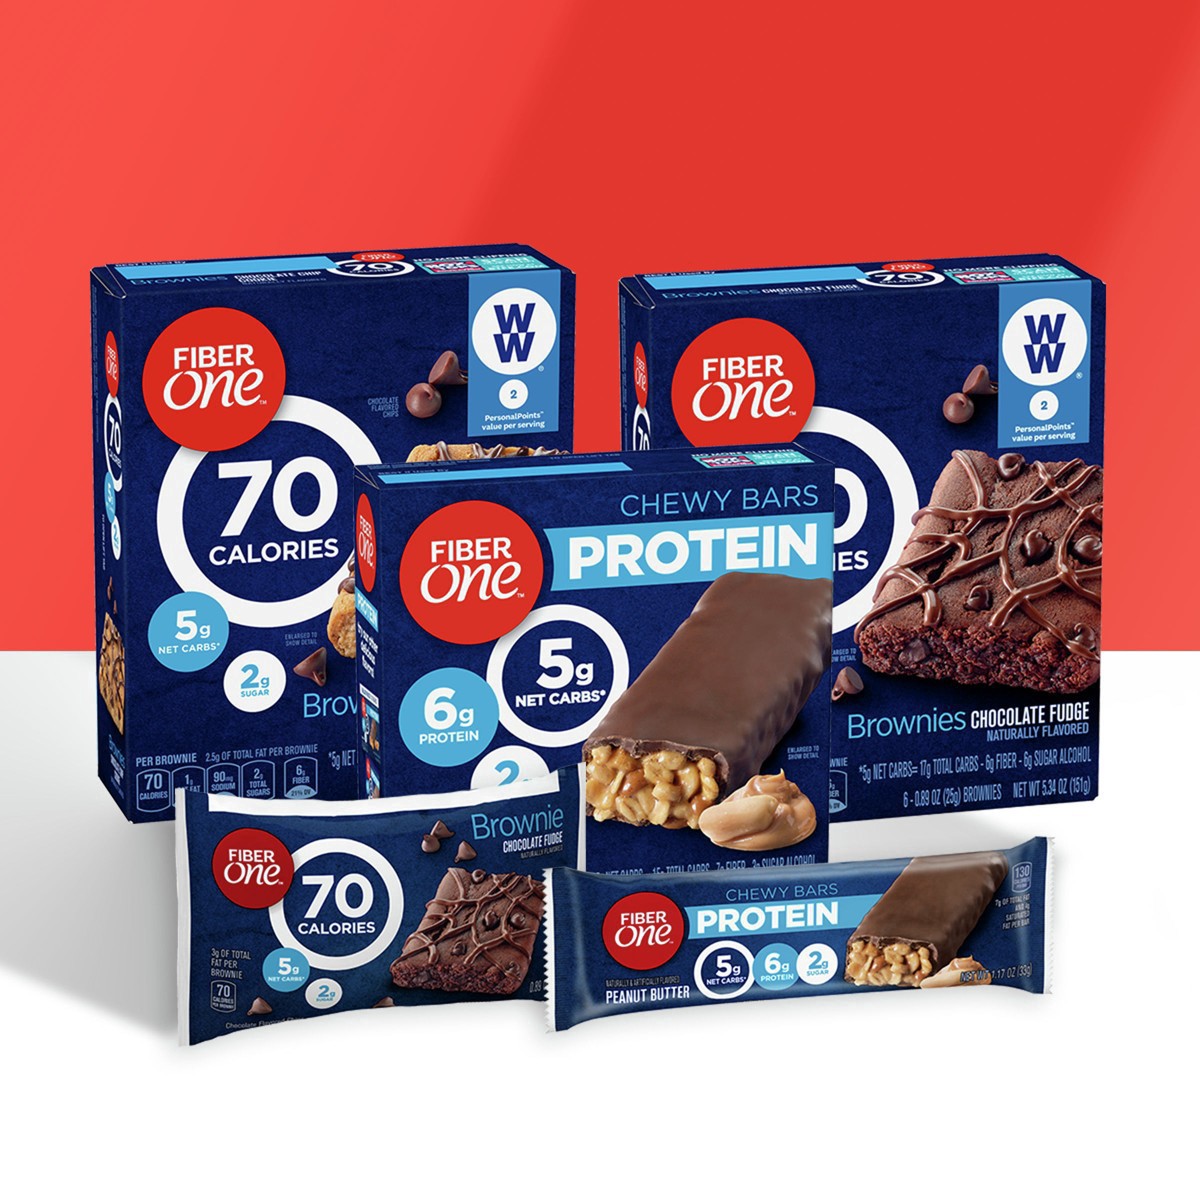 slide 9 of 89, Fiber One 70 Calorie Brownies, Chocolate Chip Cookie, Snack Bars, 6 ct, 6 ct